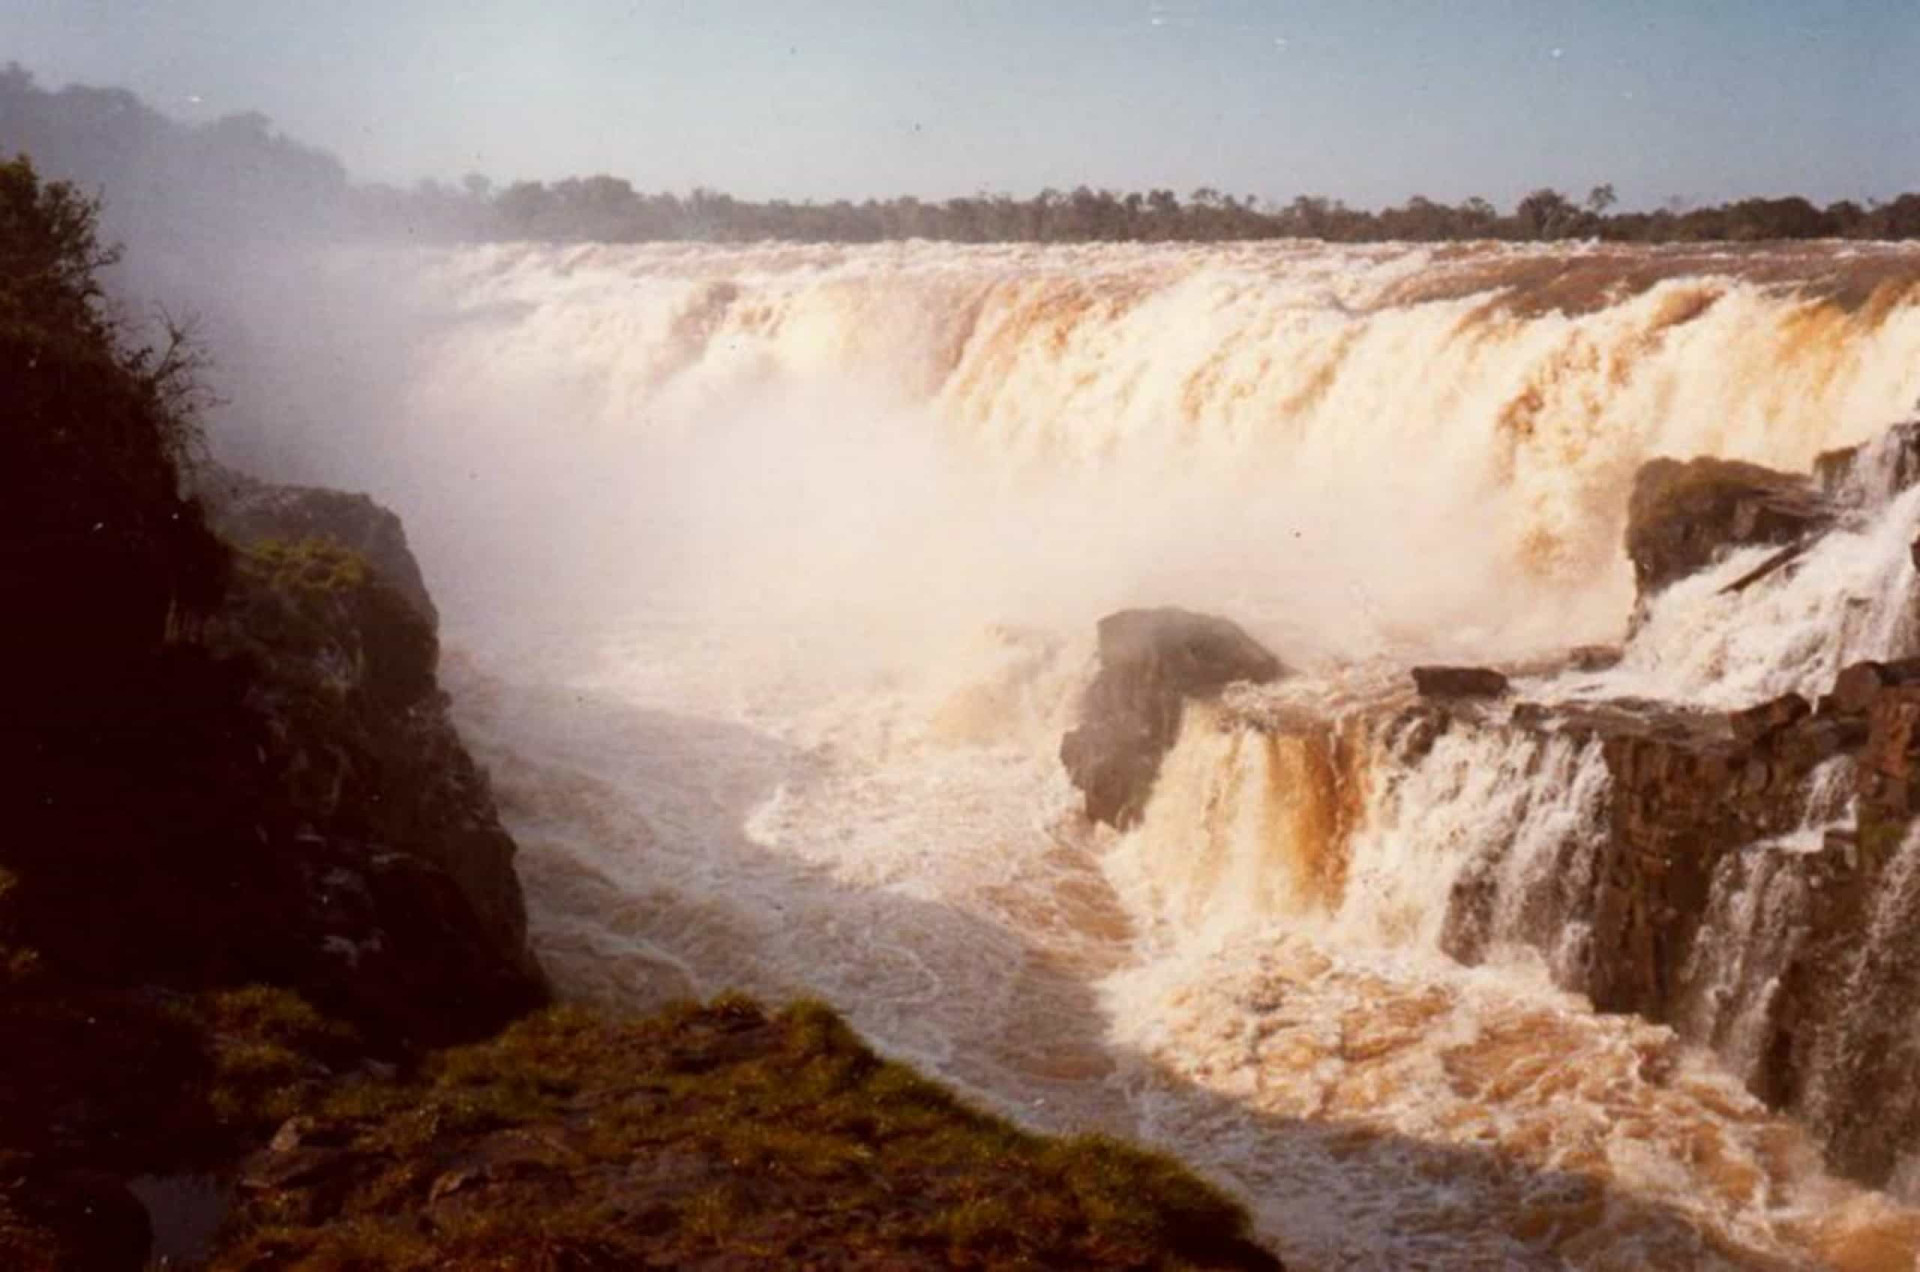 <p>The Guaíra Falls were a series of mighty waterfalls on the Paraná River along the border between Brazil and Paraguay. But this natural wonder was lost to the world in 1983 after it was inundated to pave the way for a massive hydroelectric project.</p><p>You may also like:<a href="https://www.starsinsider.com/n/473682?utm_source=msn.com&utm_medium=display&utm_campaign=referral_description&utm_content=668561en-my"> Celebs who almost became priests or nuns</a></p>